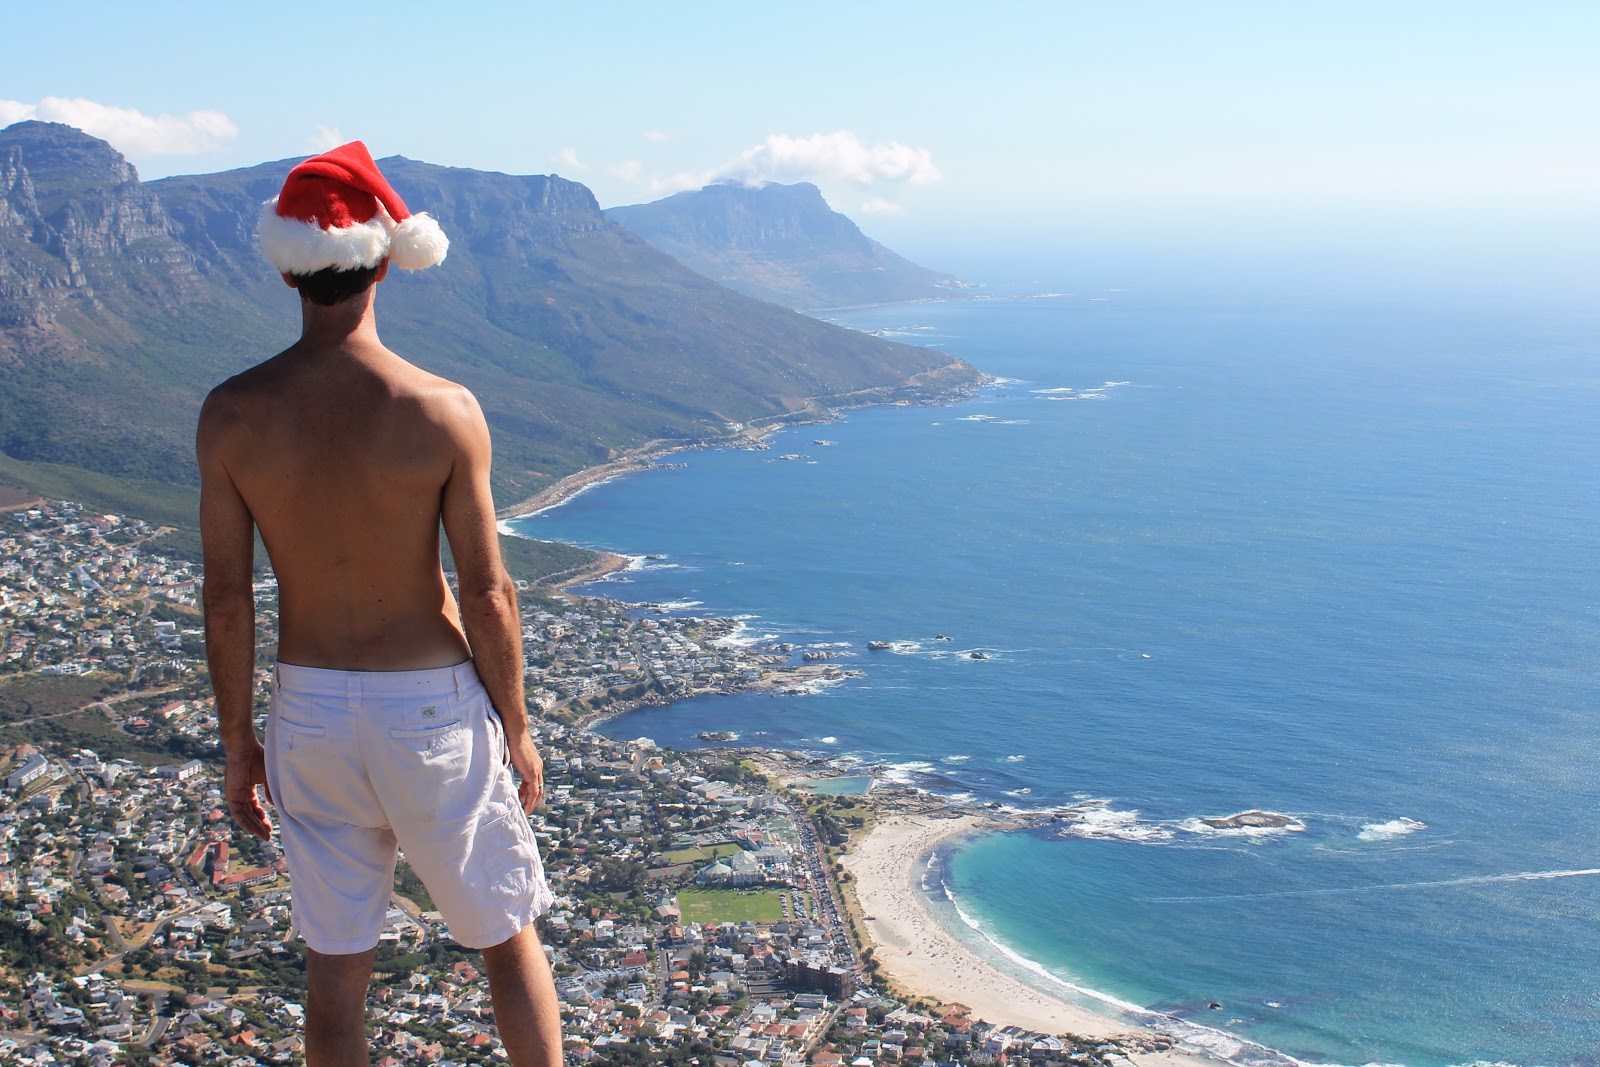 December 2019 Events Calendar for Things To Do in Cape Town